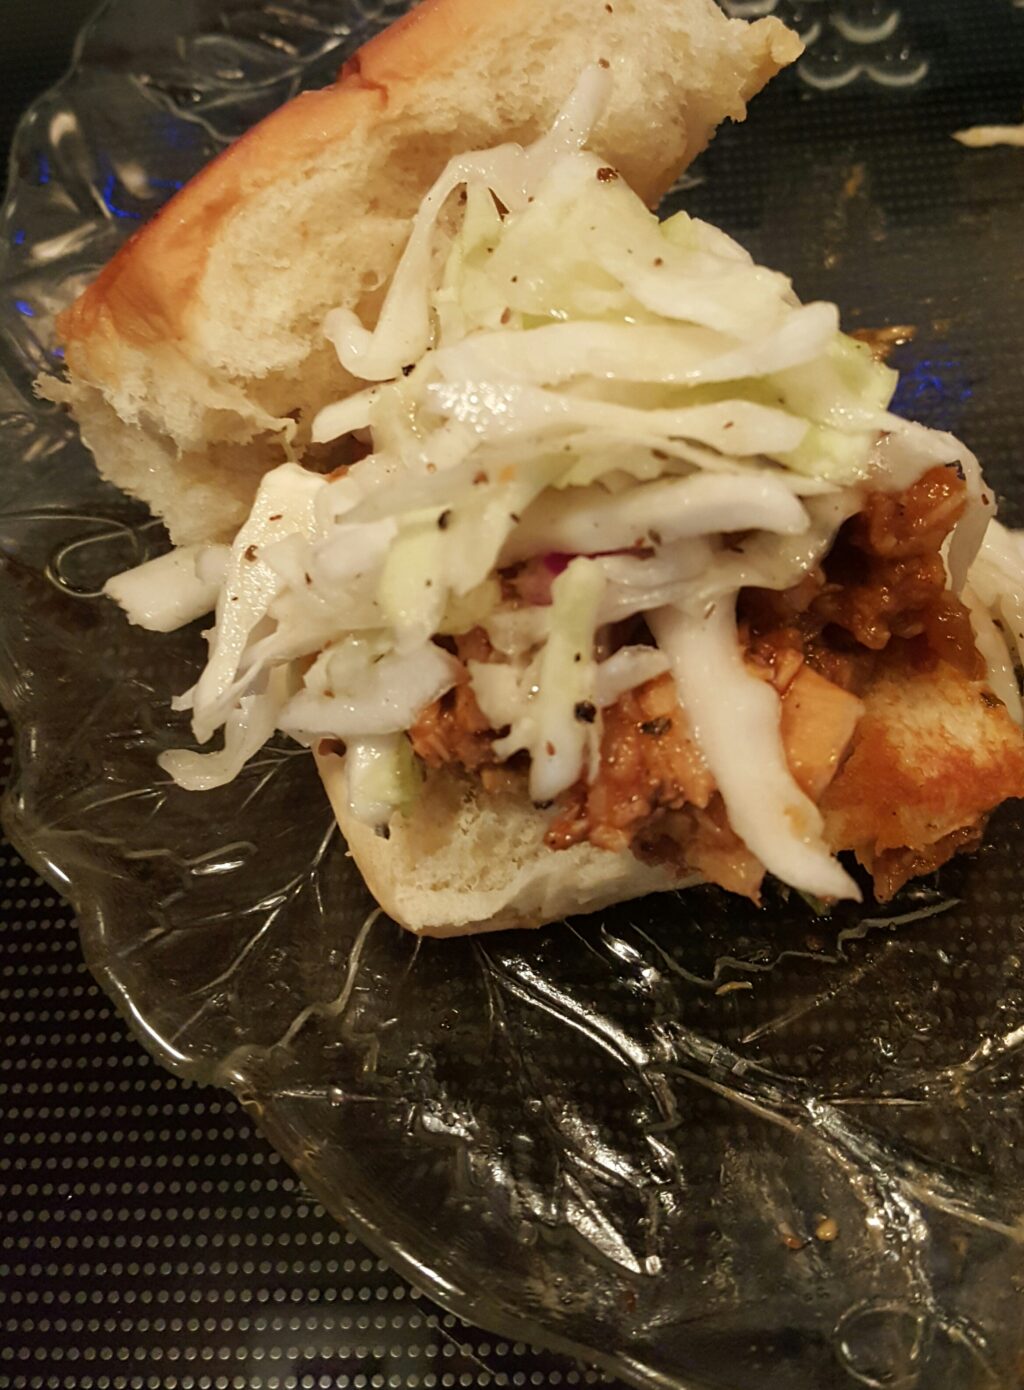 BBQ Pork Sliders From The Pressure Cooker